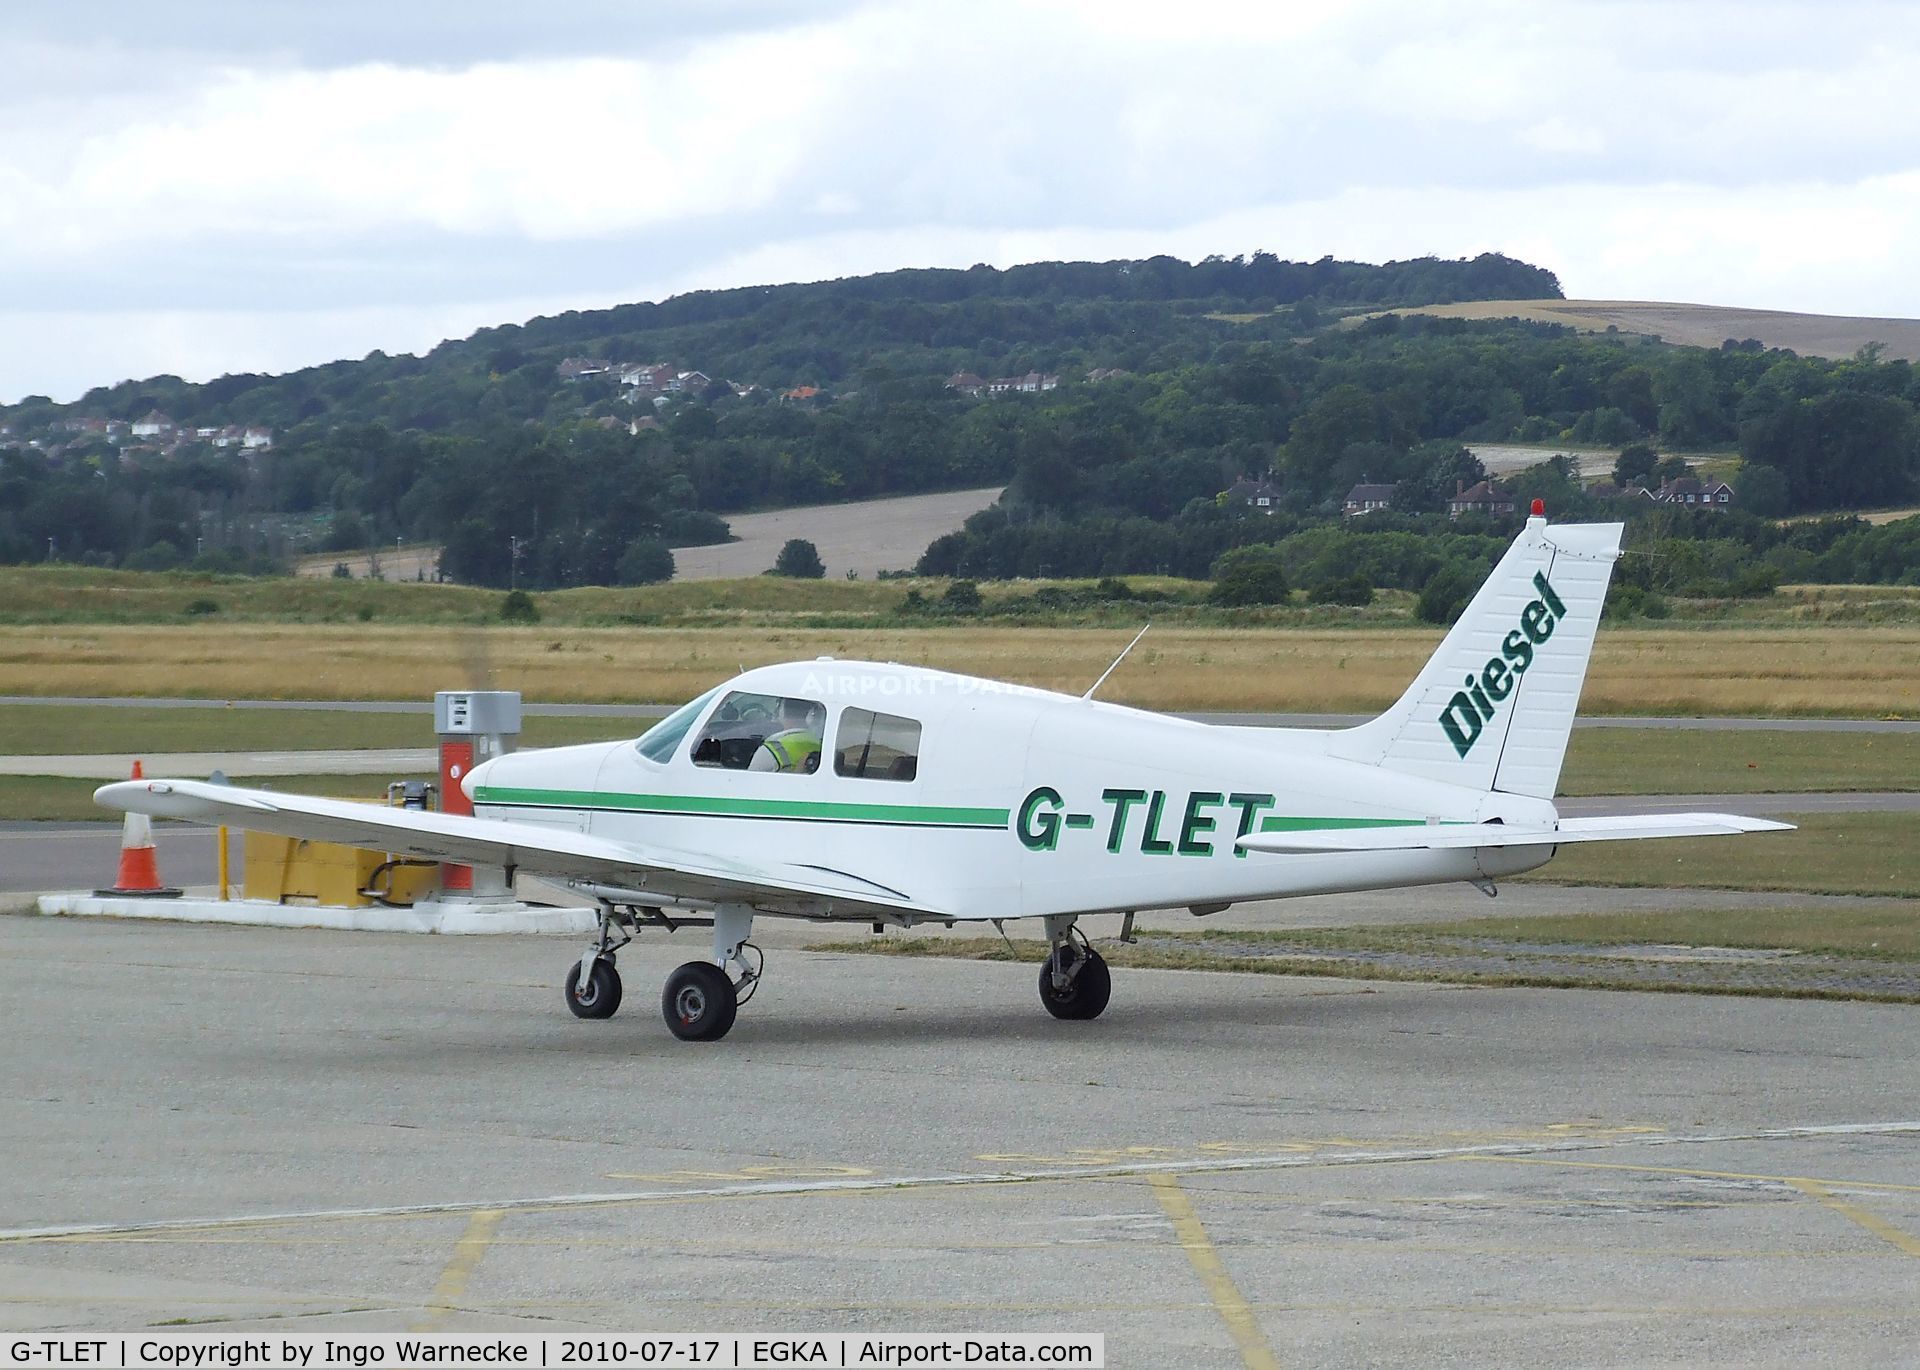 G-TLET, 1989 Piper PA-28-161 Cadet C/N 2841259, Piper PA-28-161 with Thielert Diesel engine at Shoreham airport